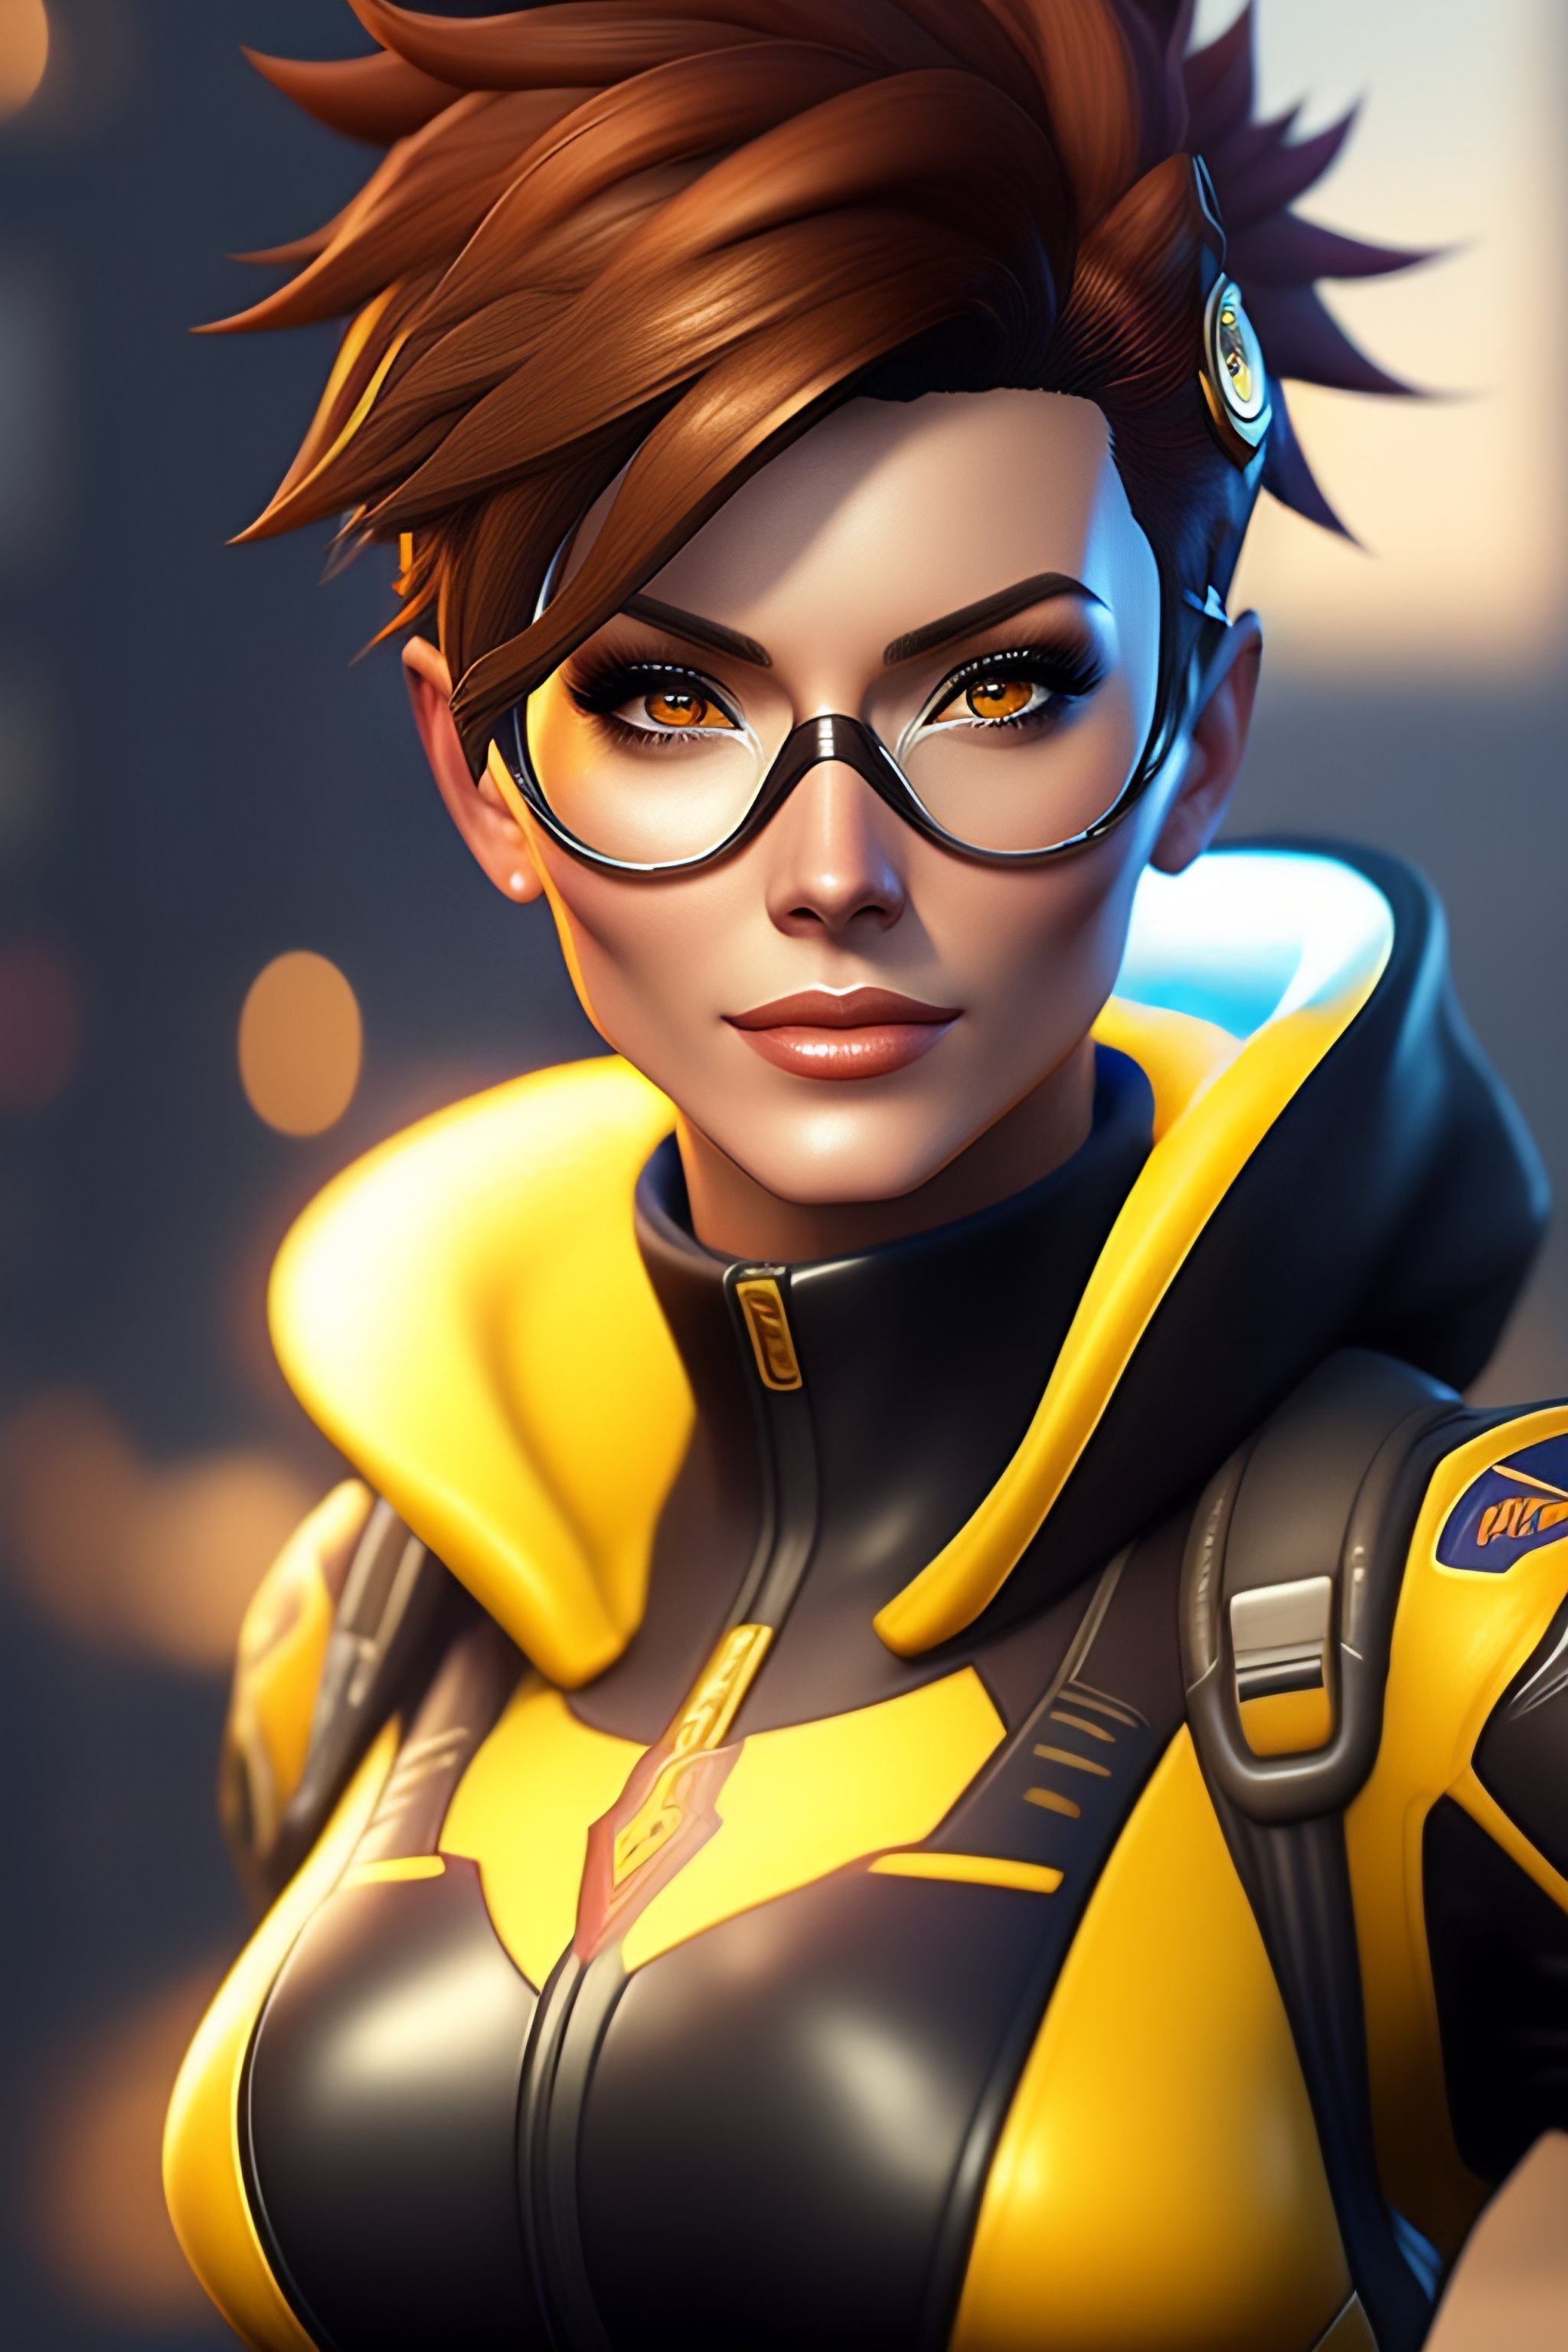 Lexica - Tracer from Overwatch at forty years of age